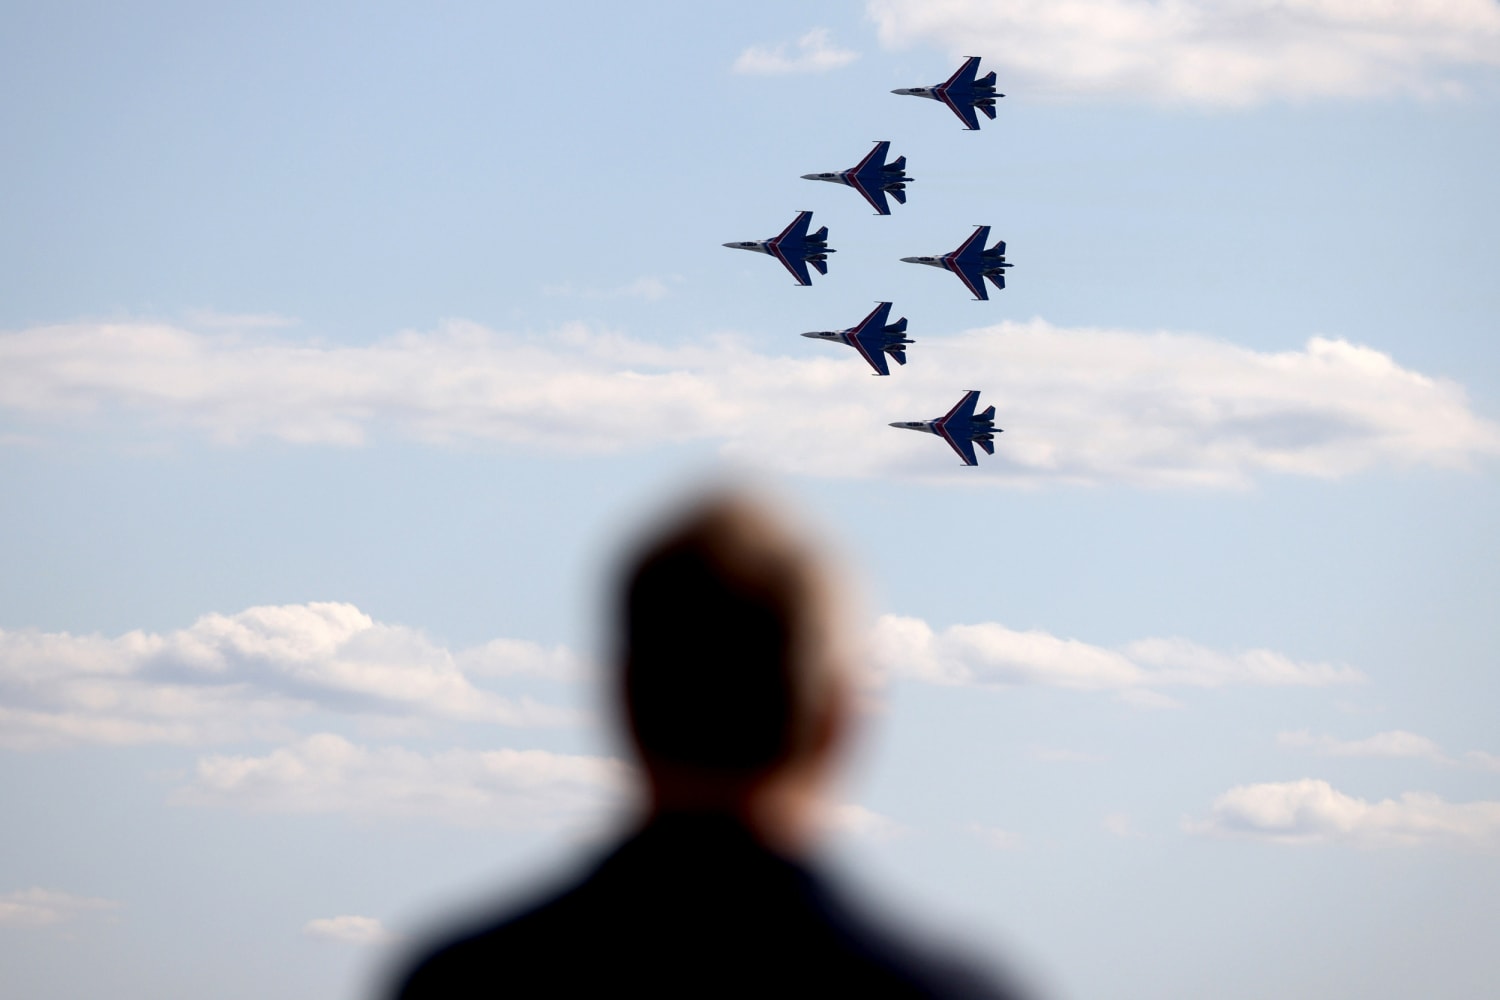 Russia says it’s just business, but push to sell new fighter jet has U.S. in sight